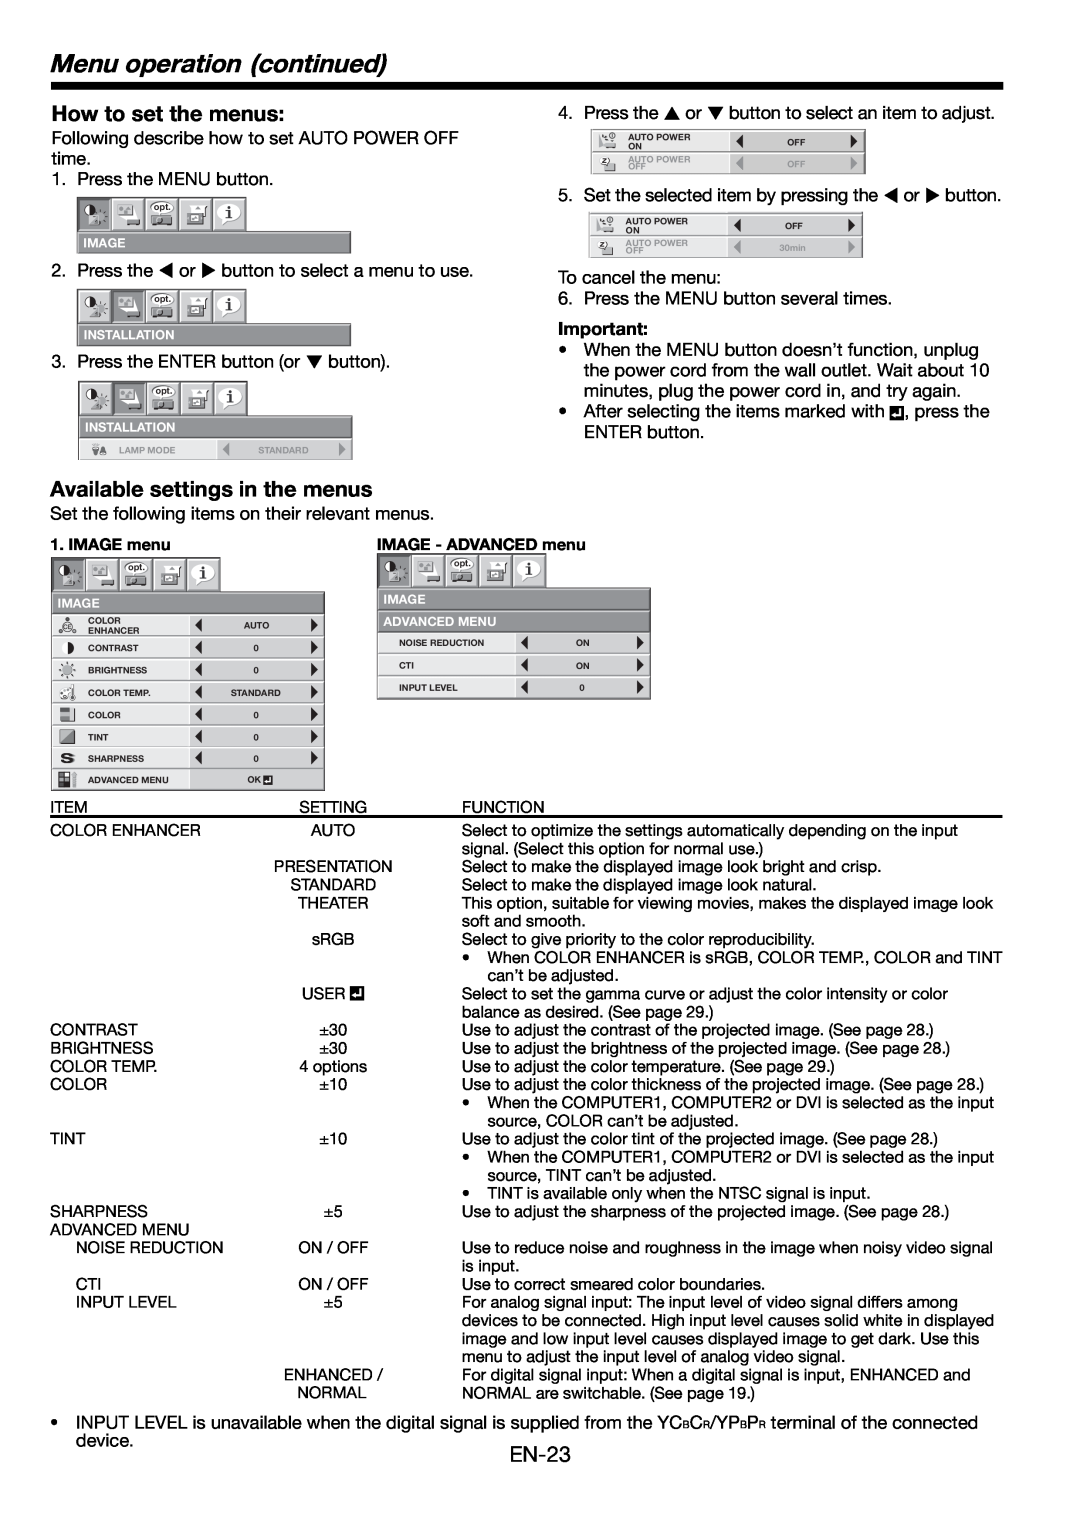 Mitsumi electronic HD8000 user manual Menu operation continued, How to set the menus, Available settings in the menus 